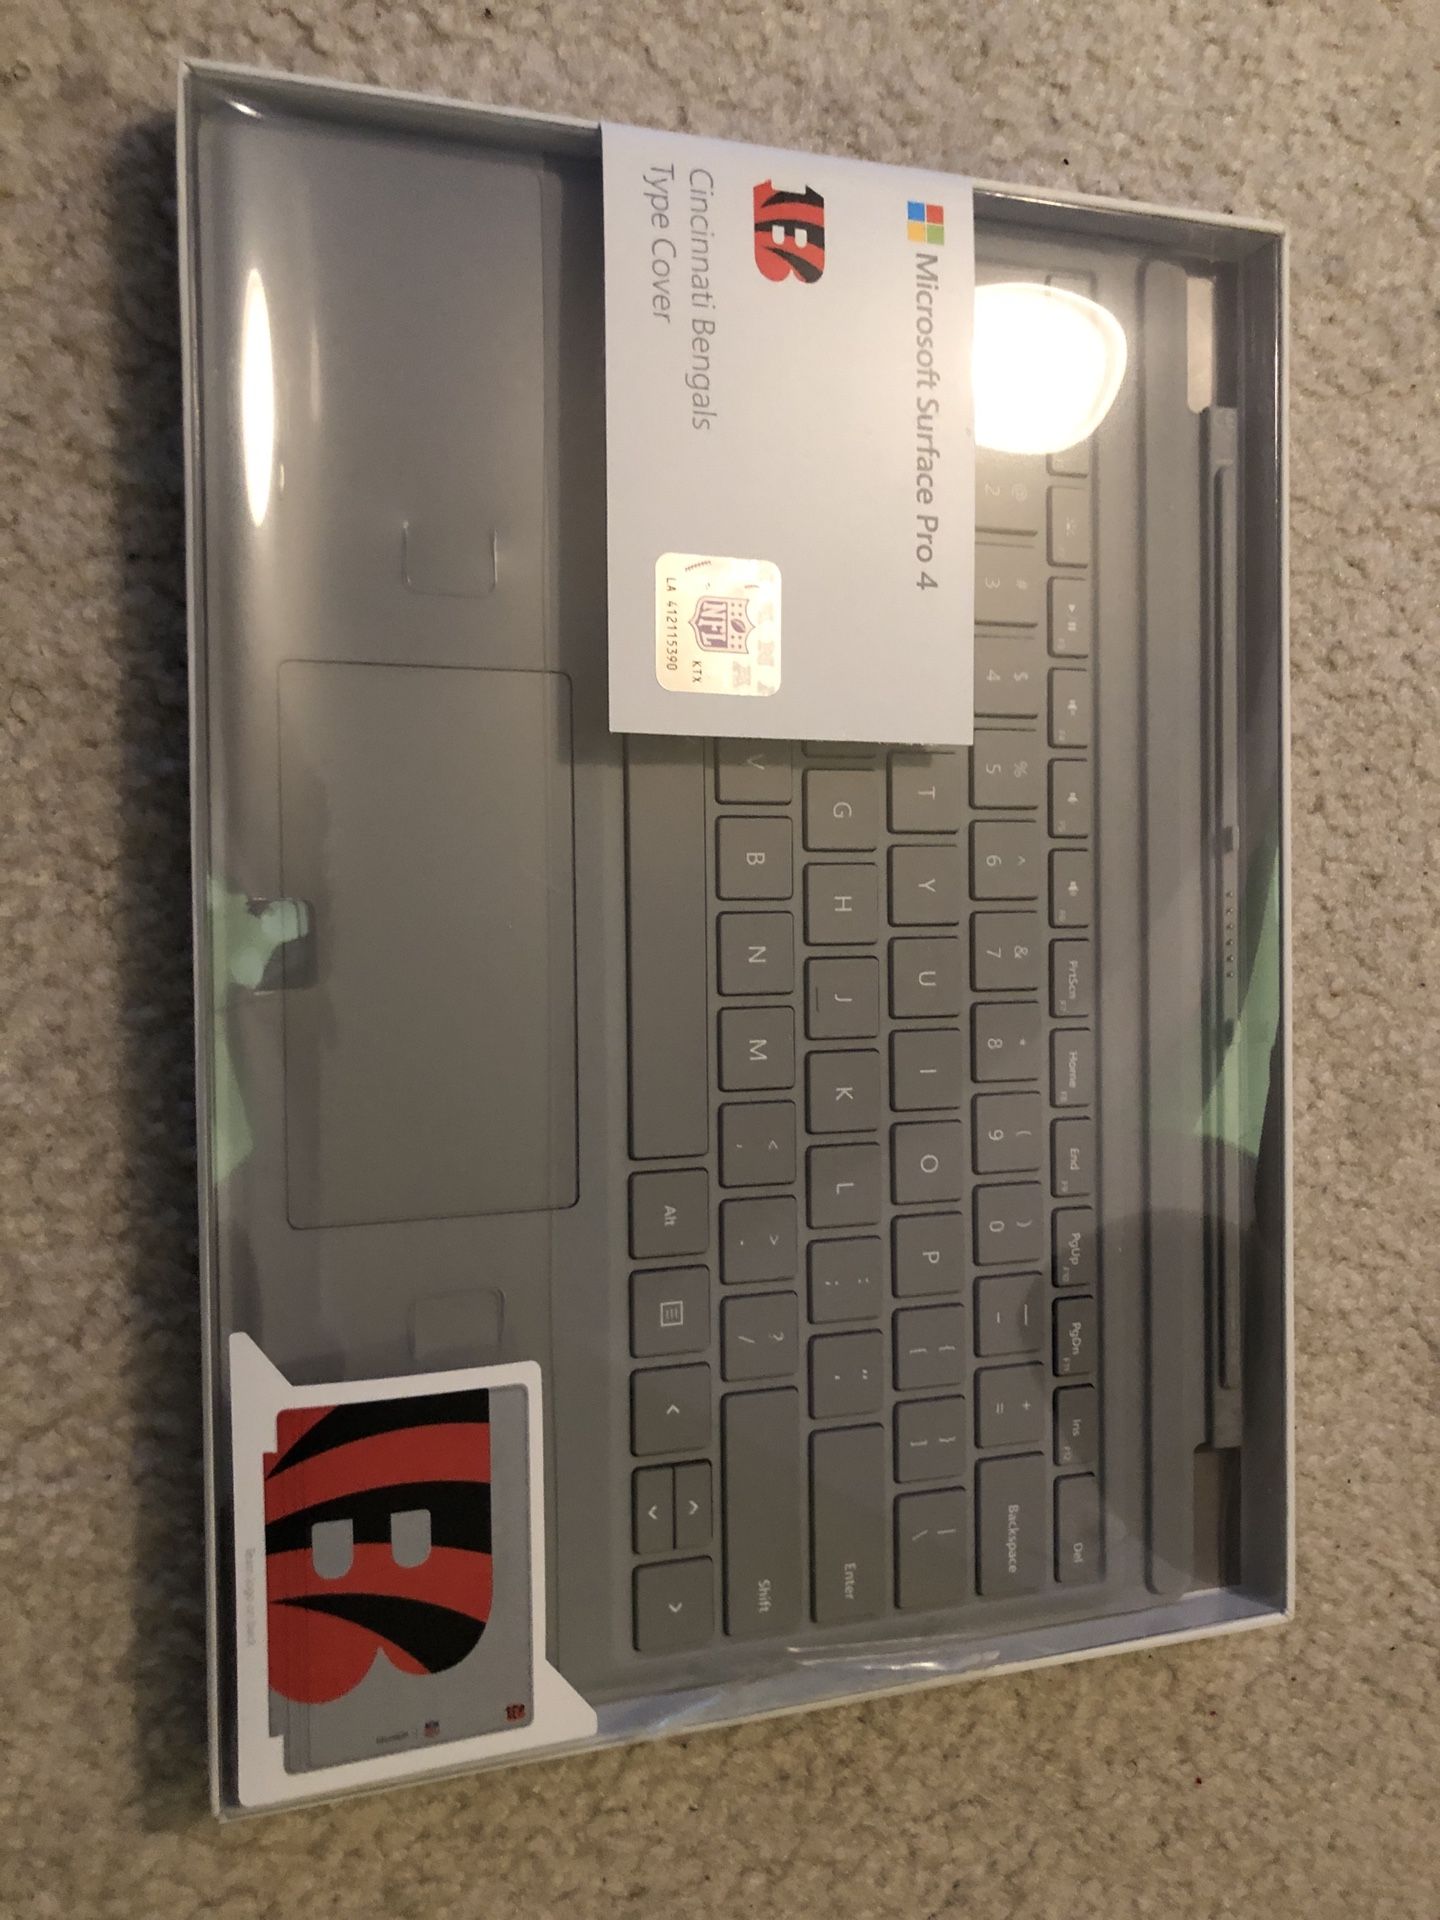 Surface pro 4, 5 and 6 keyboard with case cover